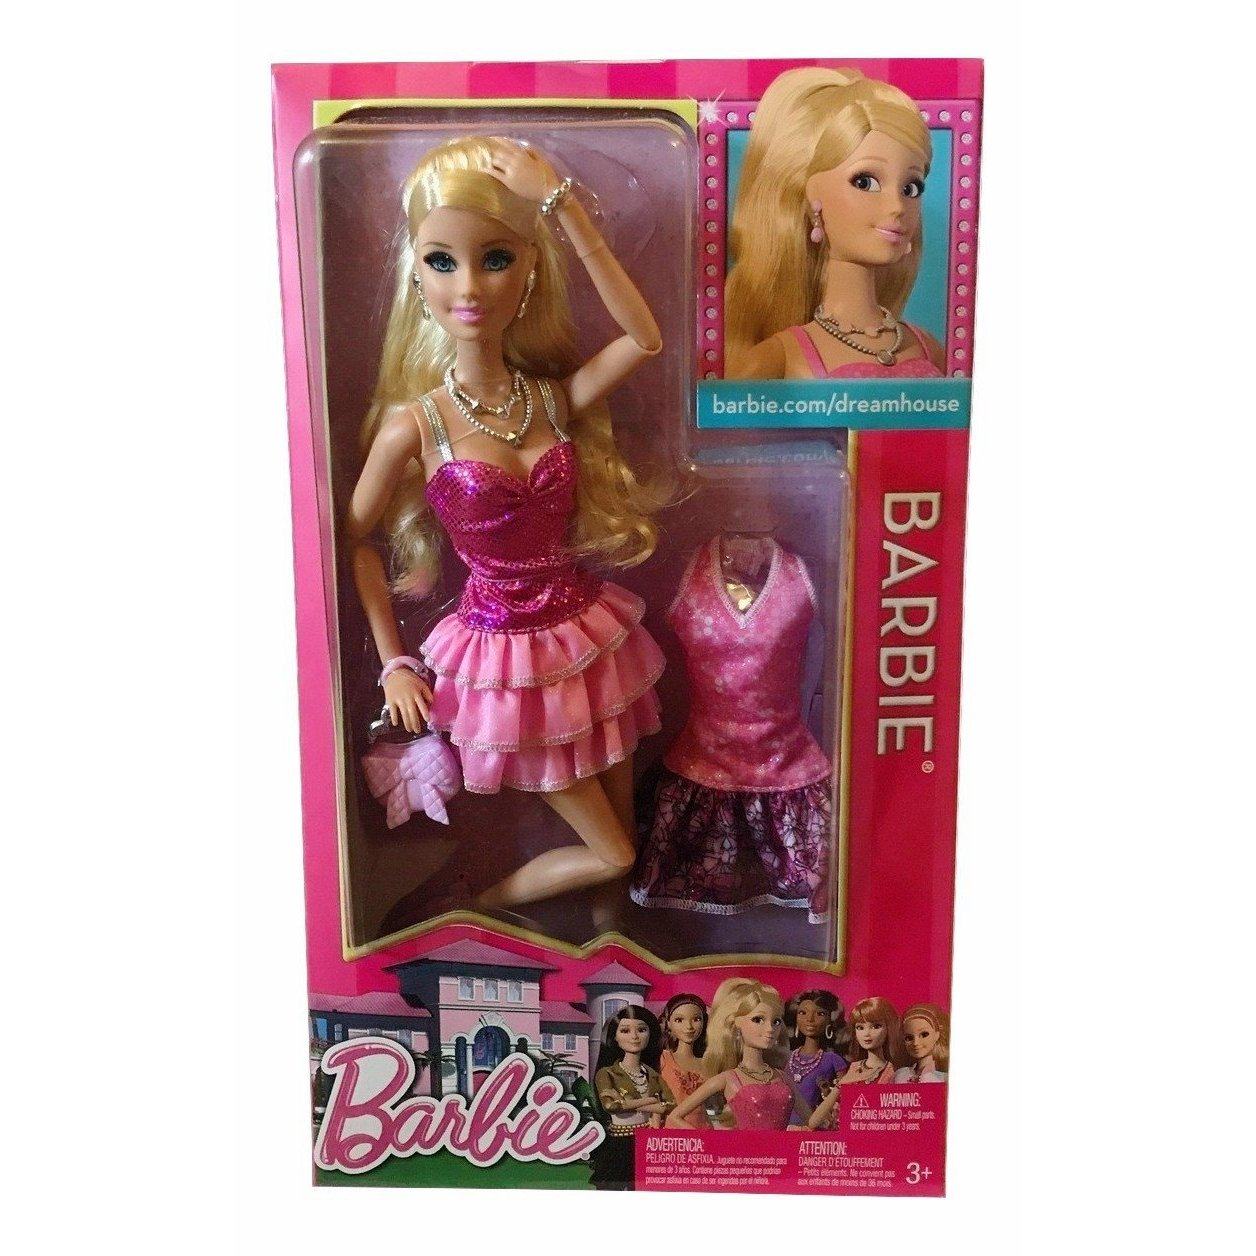 life in the dreamhouse barbie dolls